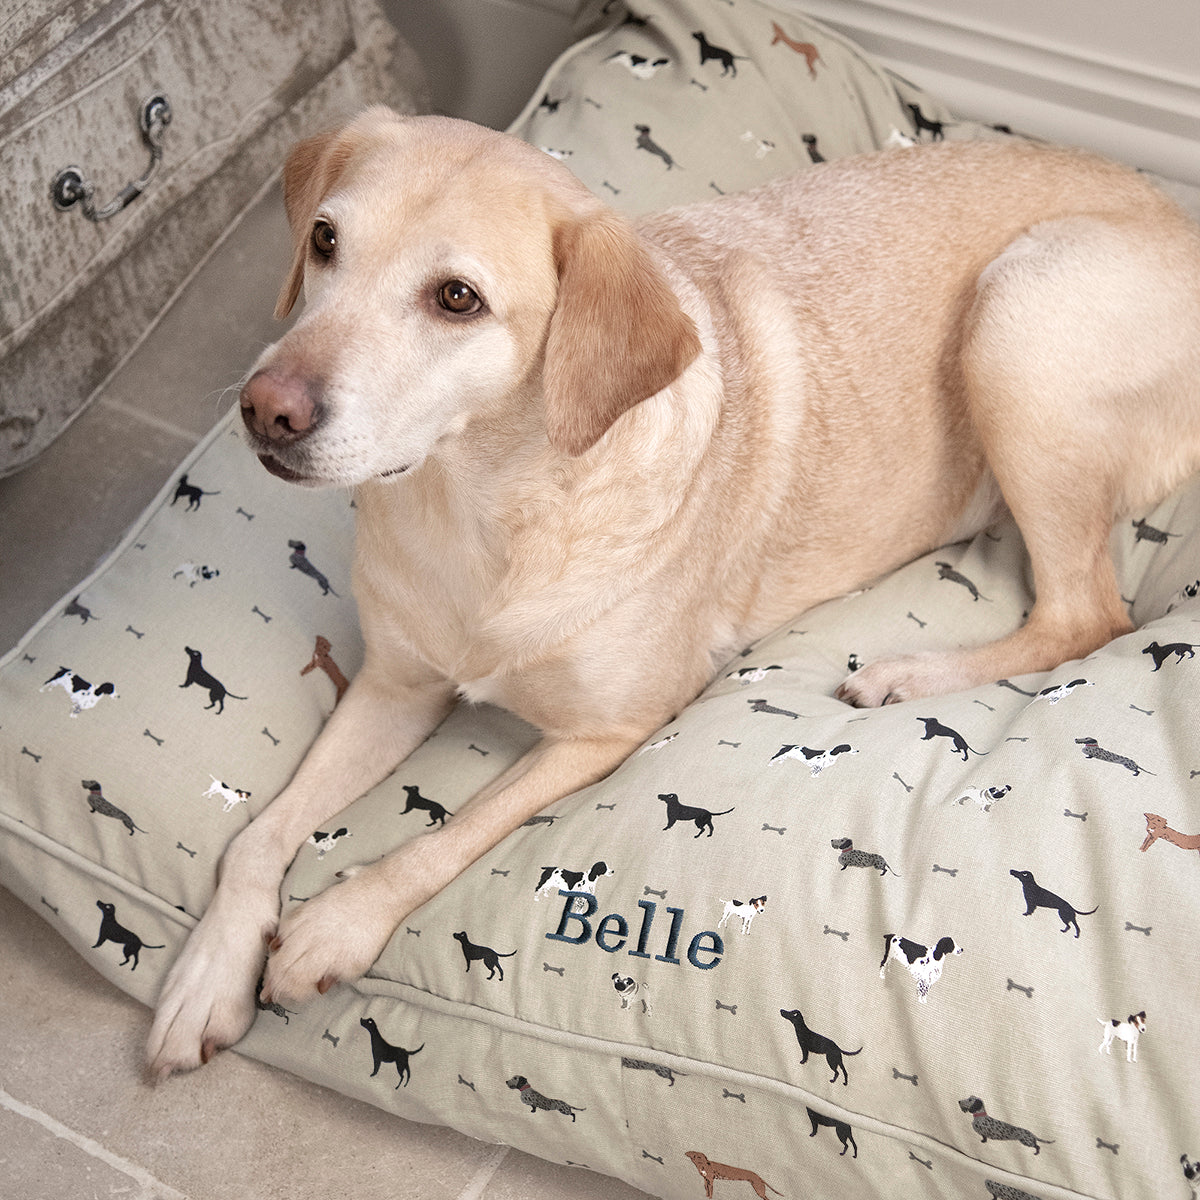 Woof pet mattress cover by Sophie Allport